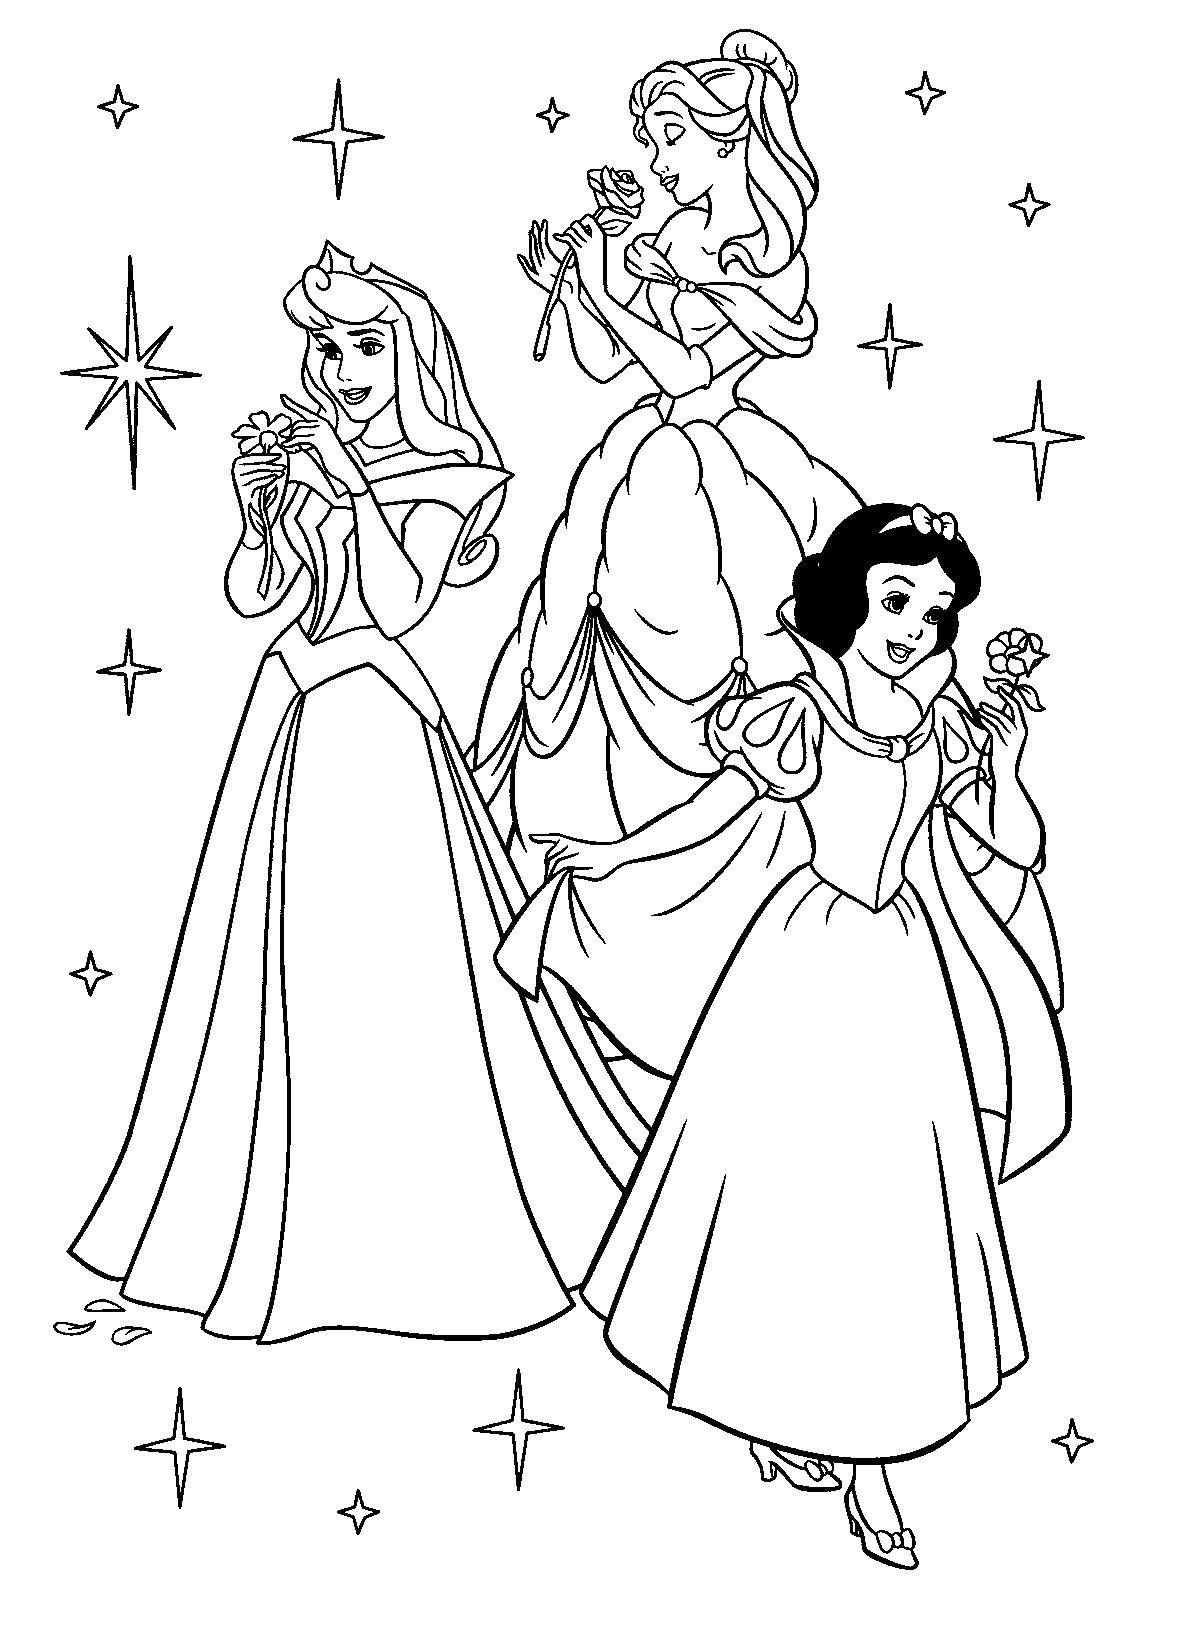 Coloring Snow white, Belle and rose. Category Princess. Tags:  Princess, Disney.